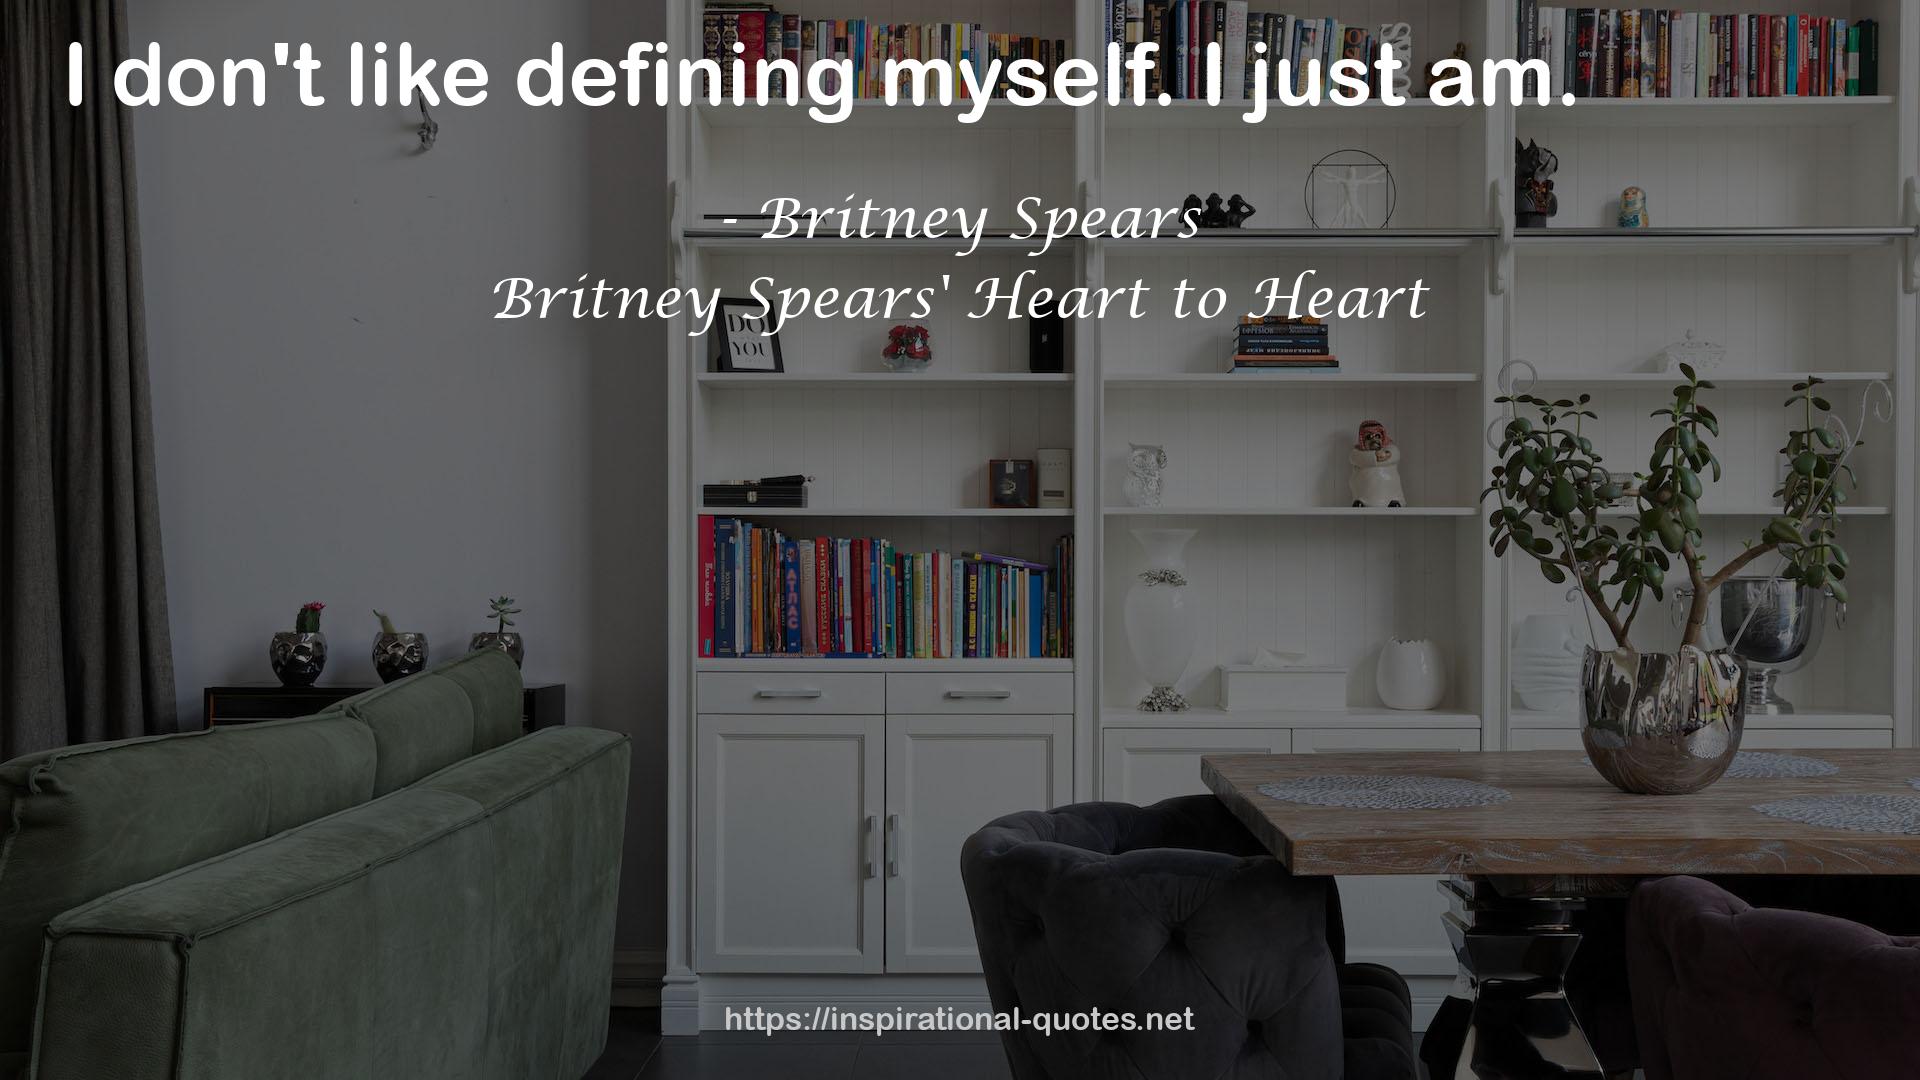 Britney Spears' Heart to Heart QUOTES